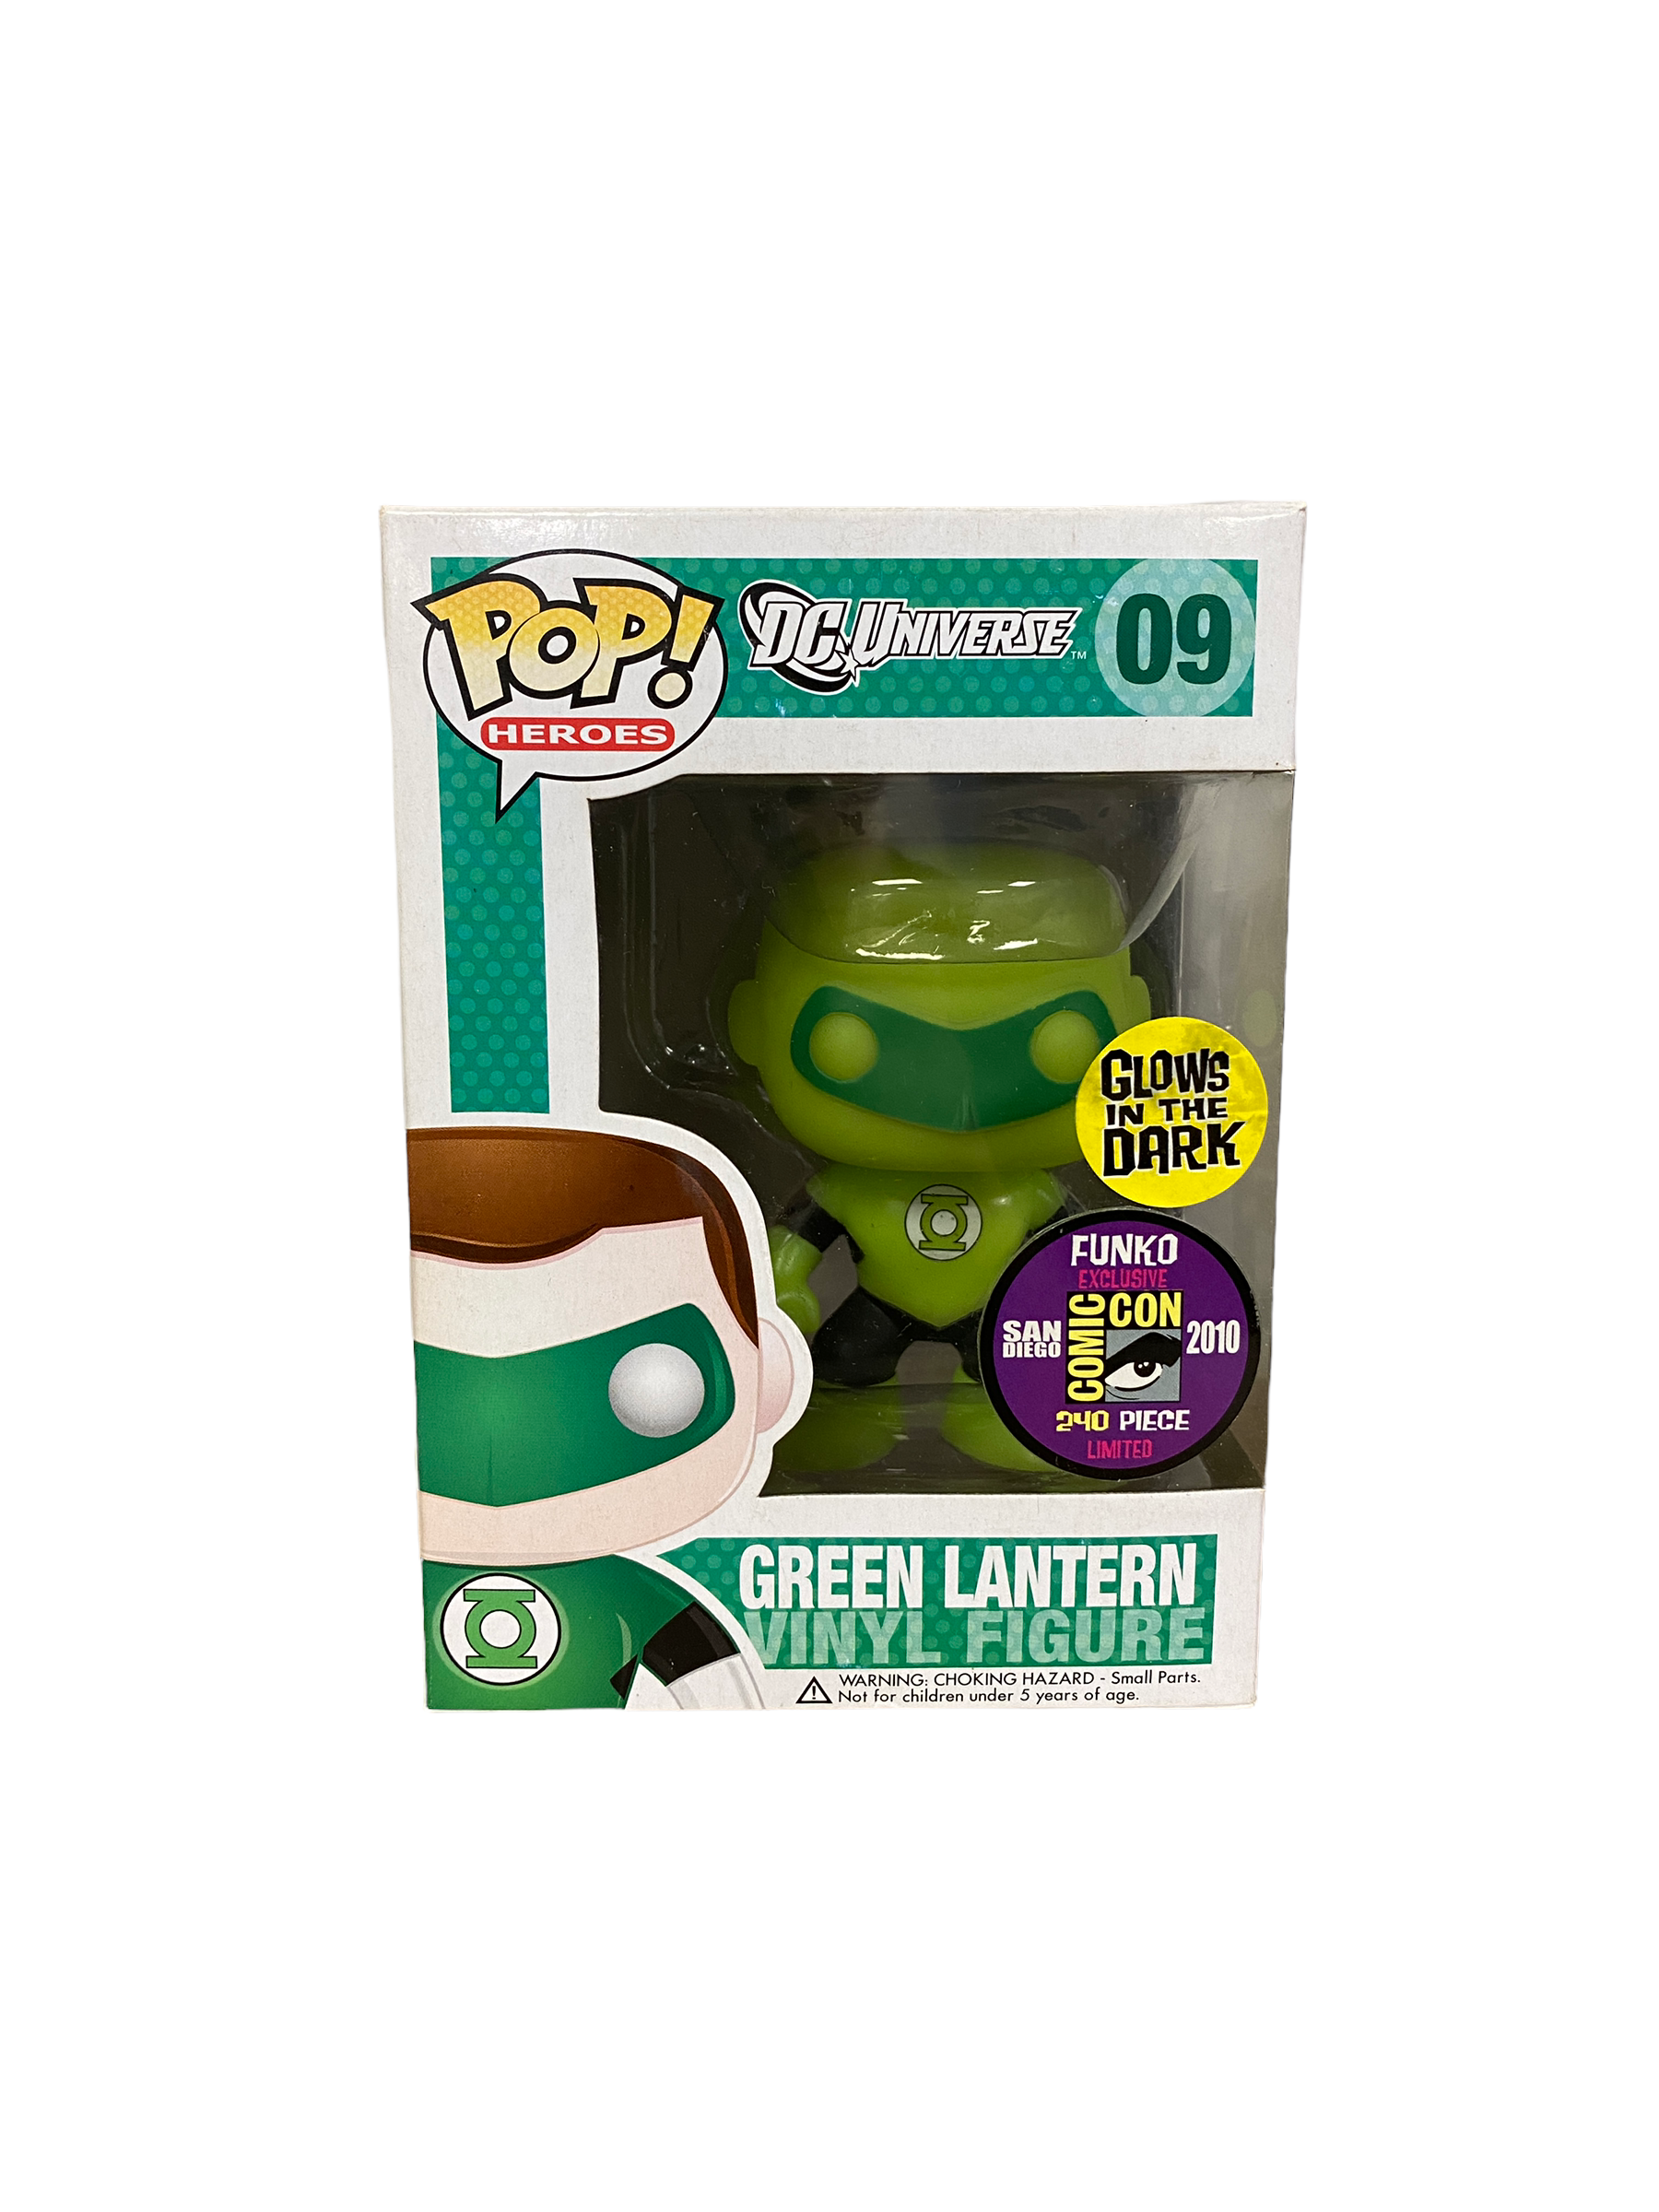 Green Lantern #09 (Glows In The Dark) Funko Pop! - DC Universe - SDCC 2010 Exclusive LE240 Pcs - (Clamshell Box Replacement) - Condition 8.5/10